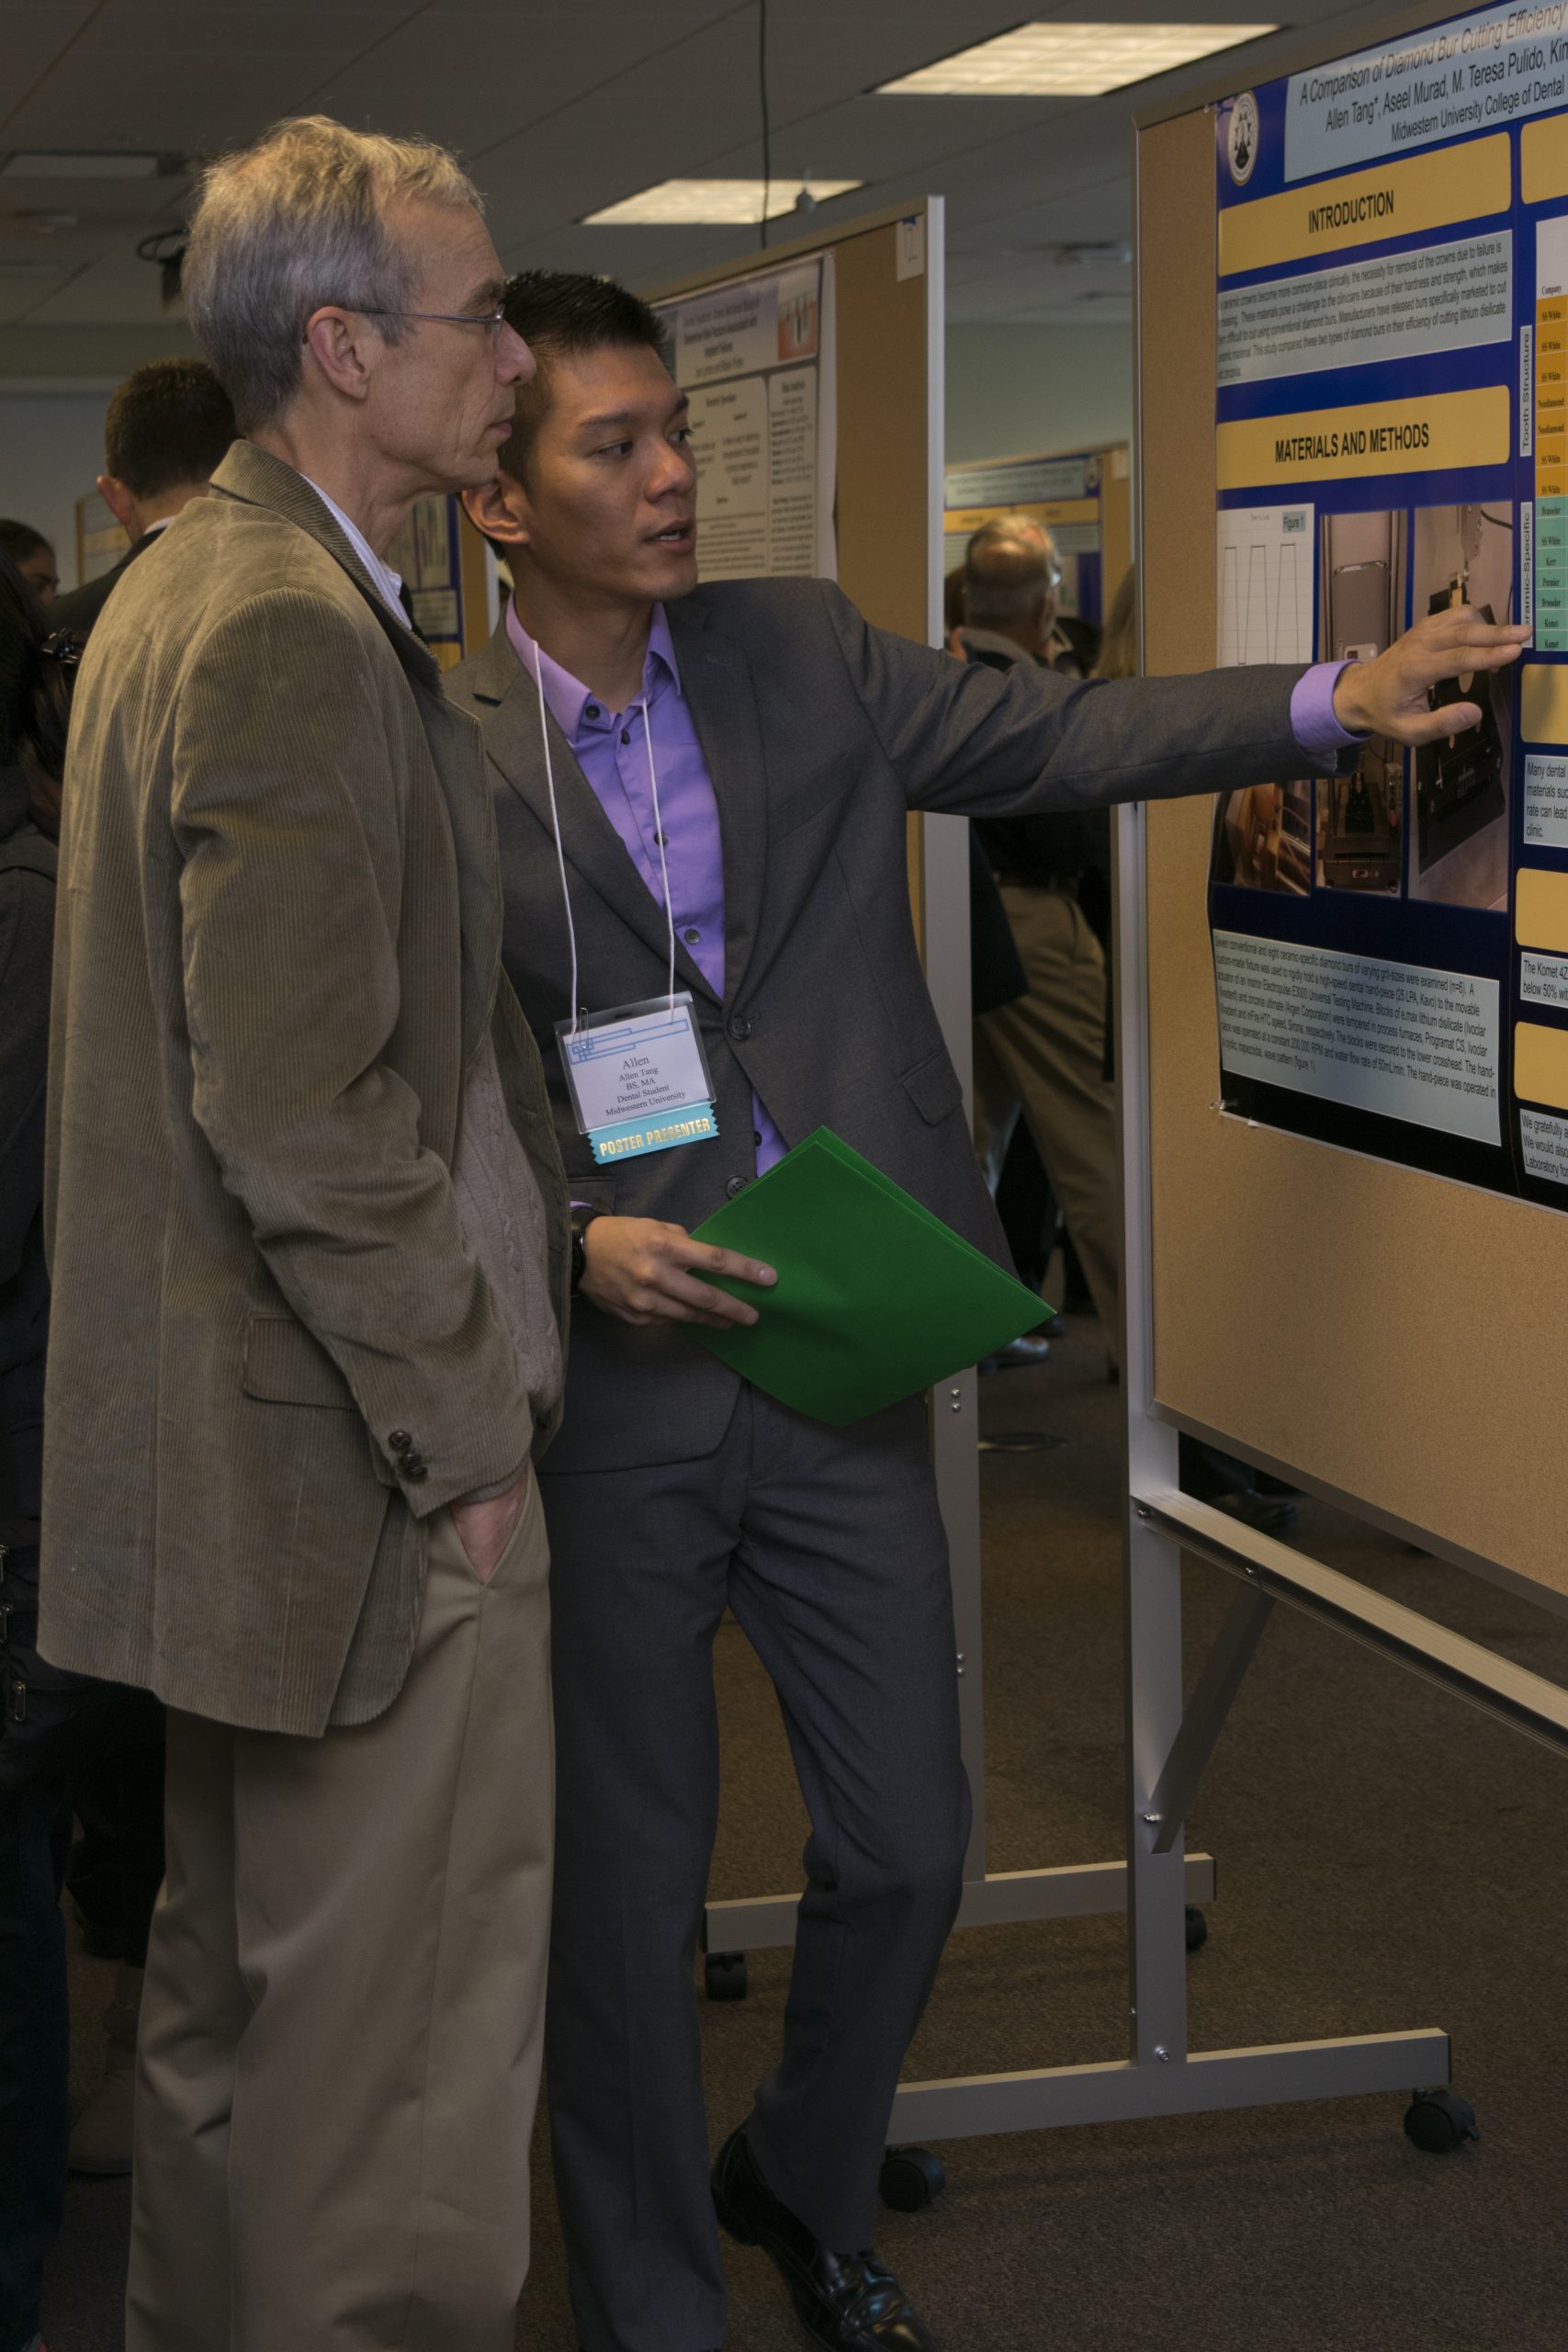 Faculty and students present research posters